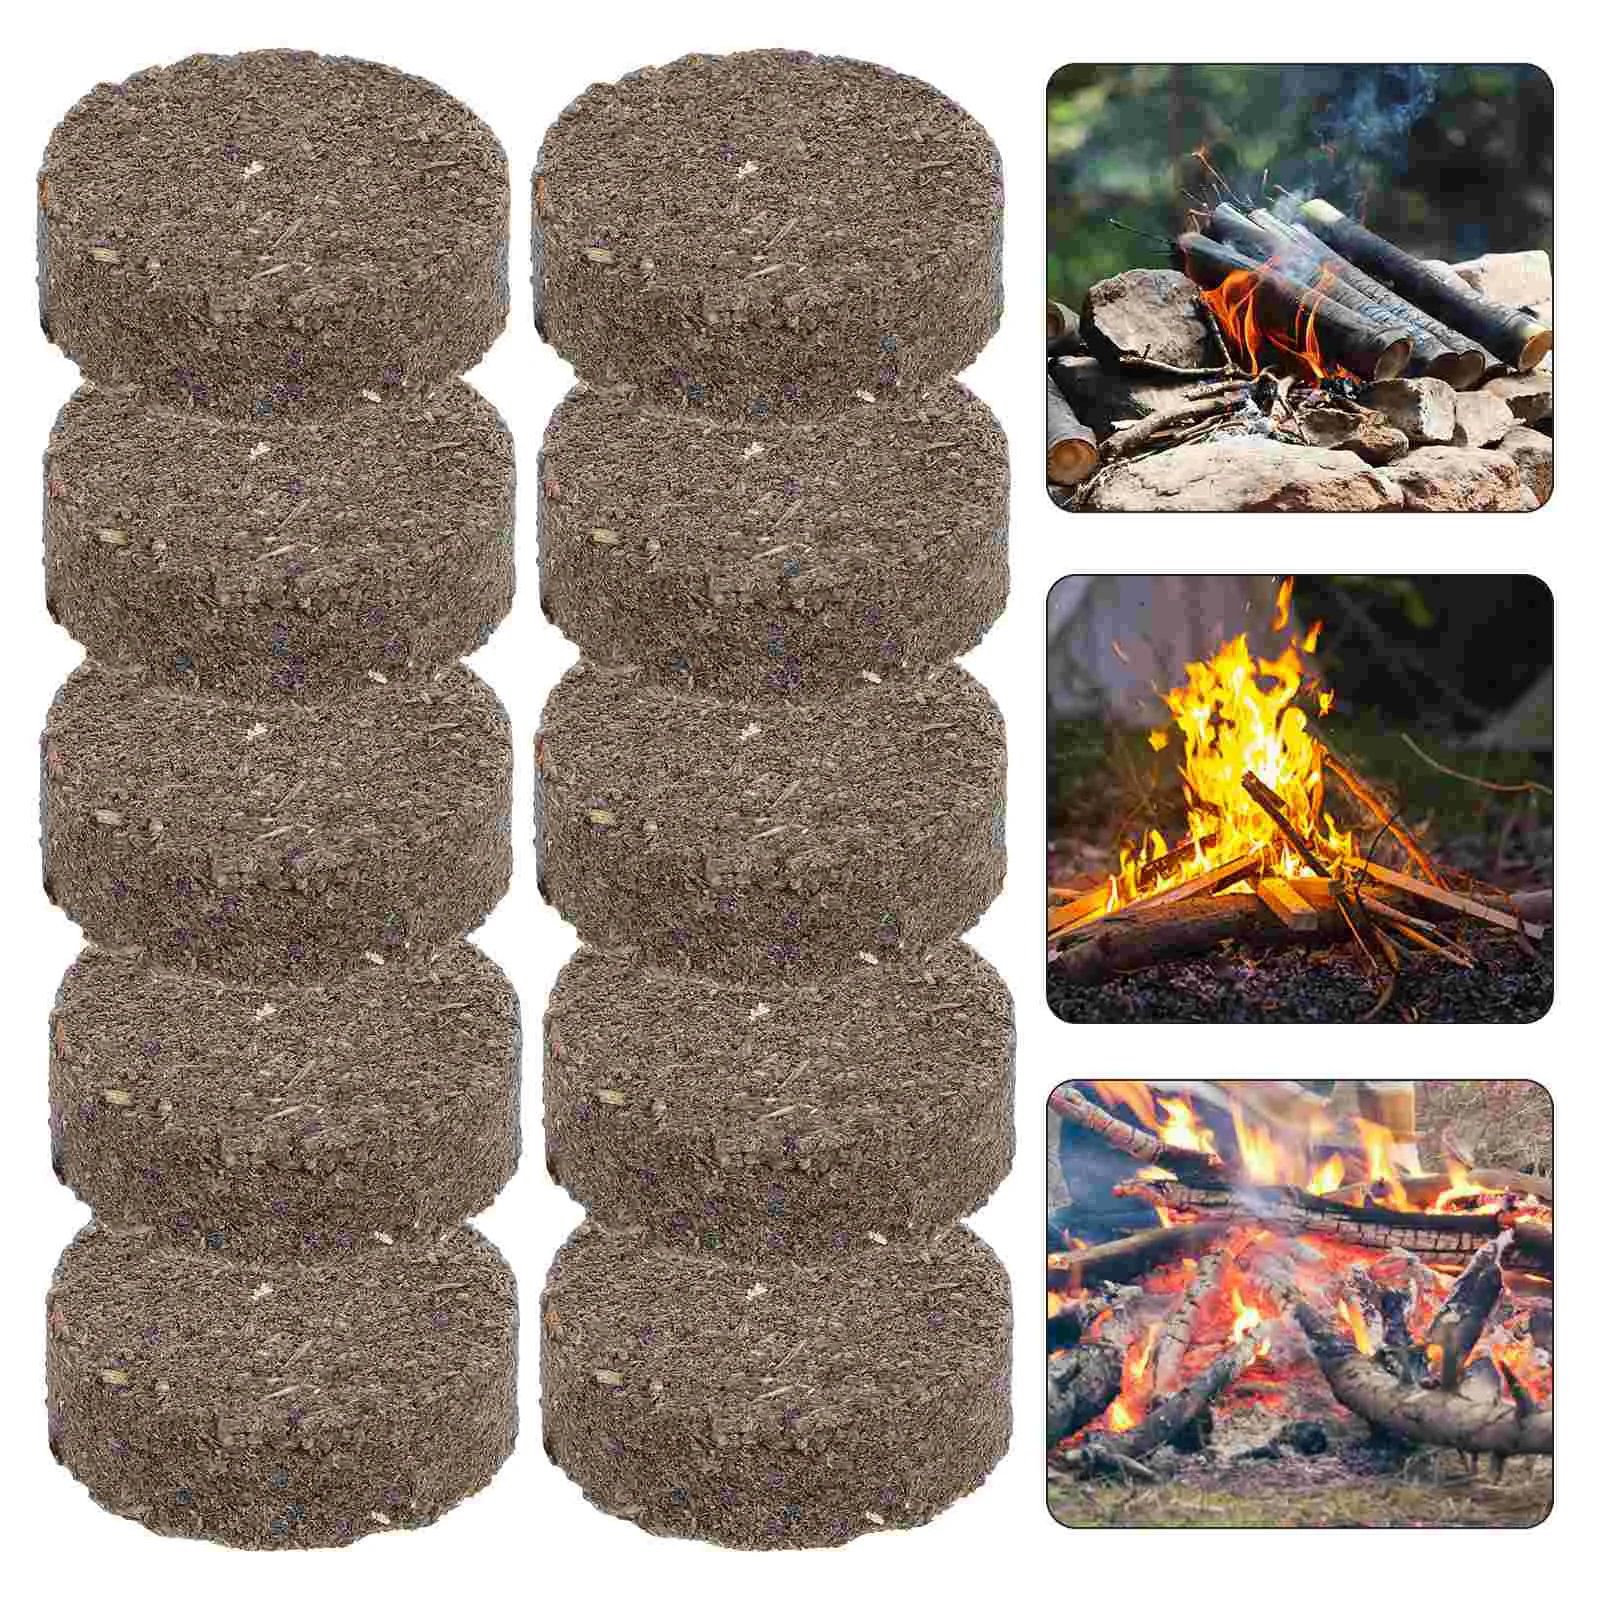 

10 Pcs Burner Outdoor Picnic Small Hot Pot Charcoal Ignition Block Lighters Camping Wood Firelighter Blocks for